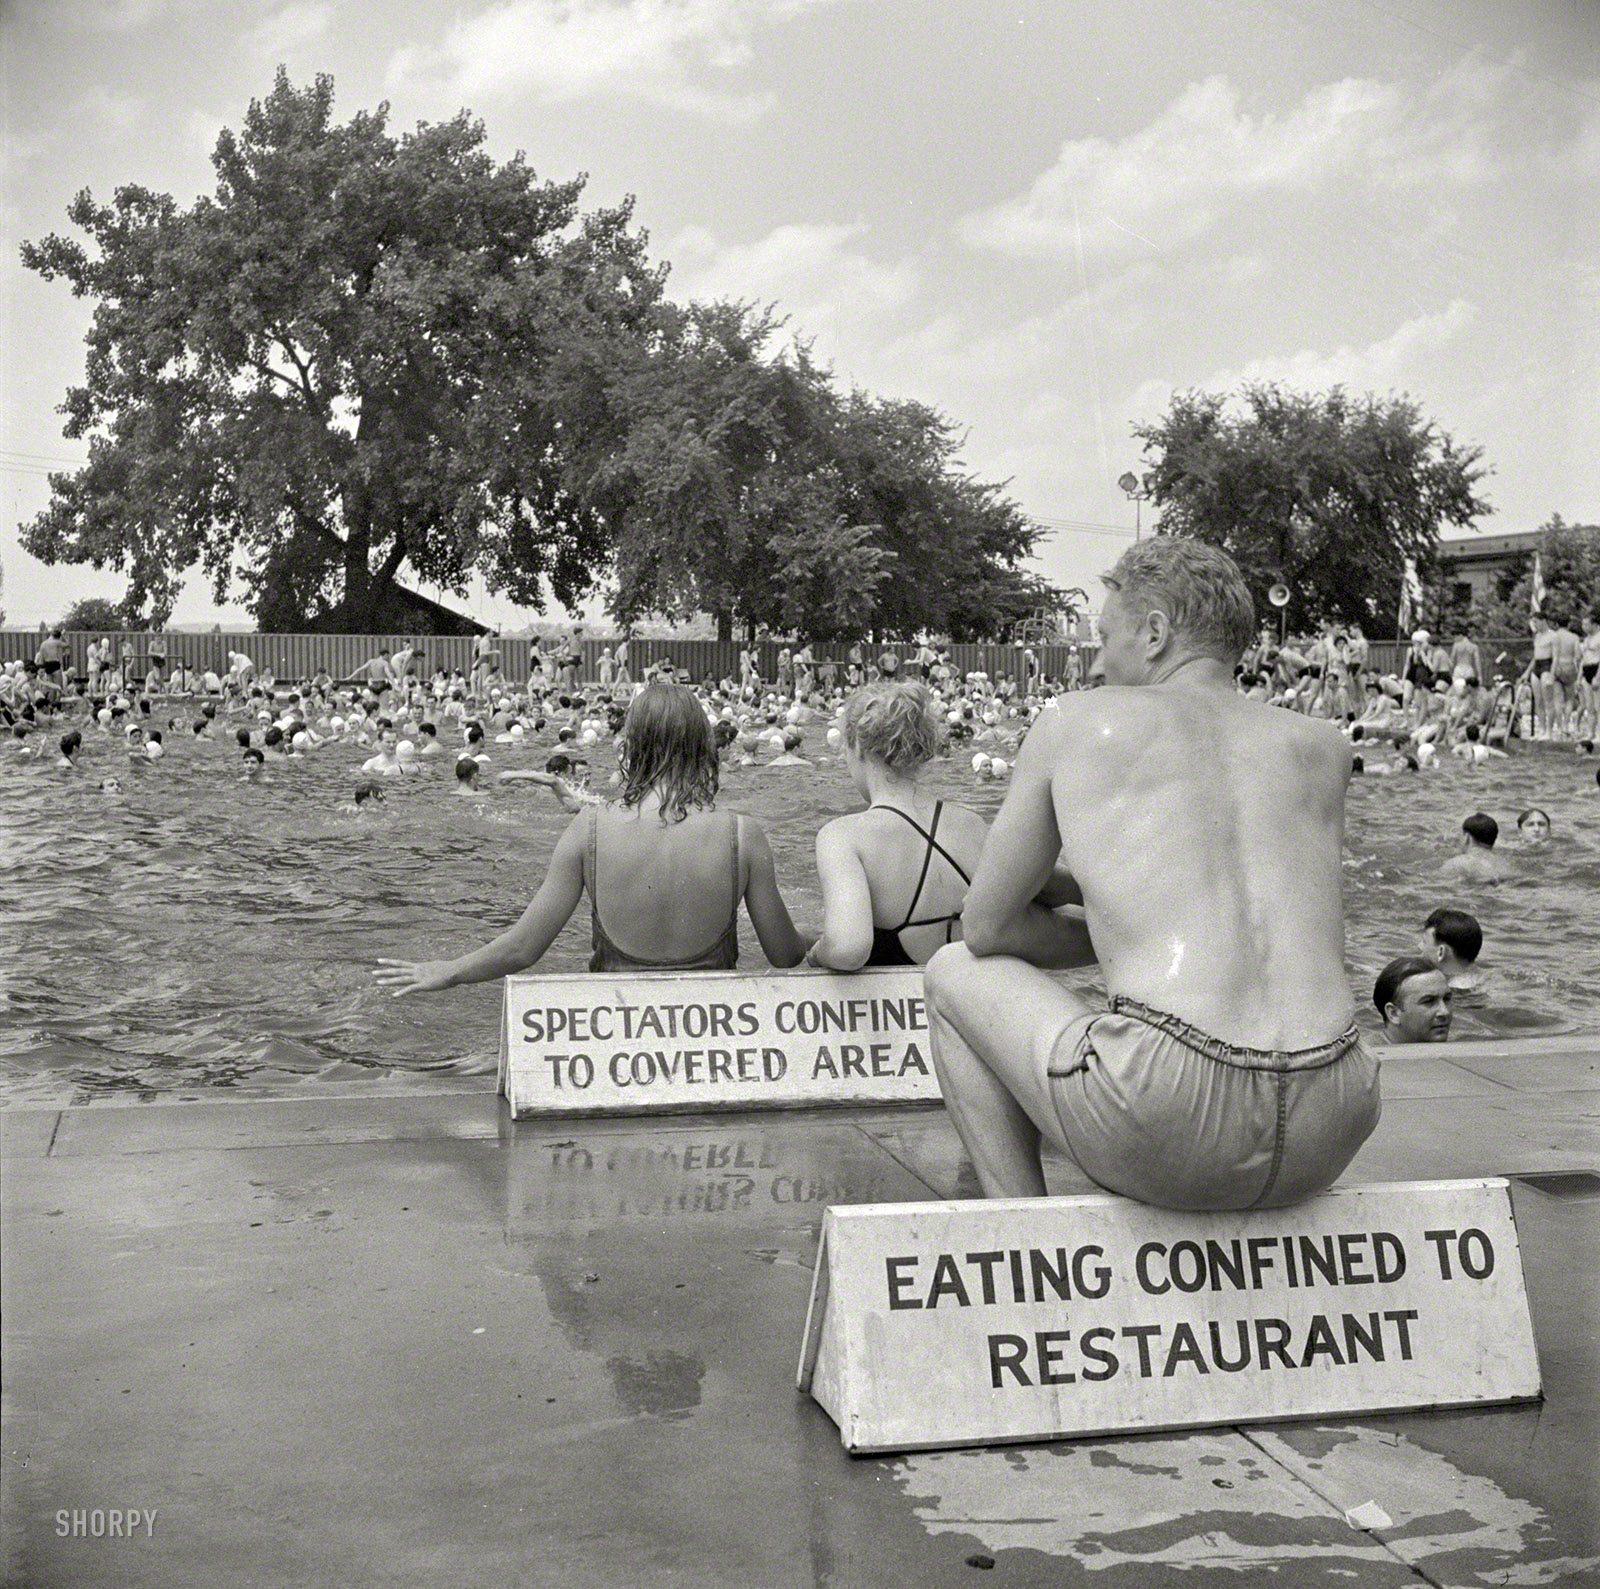 July 1942. Washington, D.C. "Municipal swimming pool on Sunday." Remember: Sitting confined to sign. Photo by Marjory Collins for the OWI. View full size.